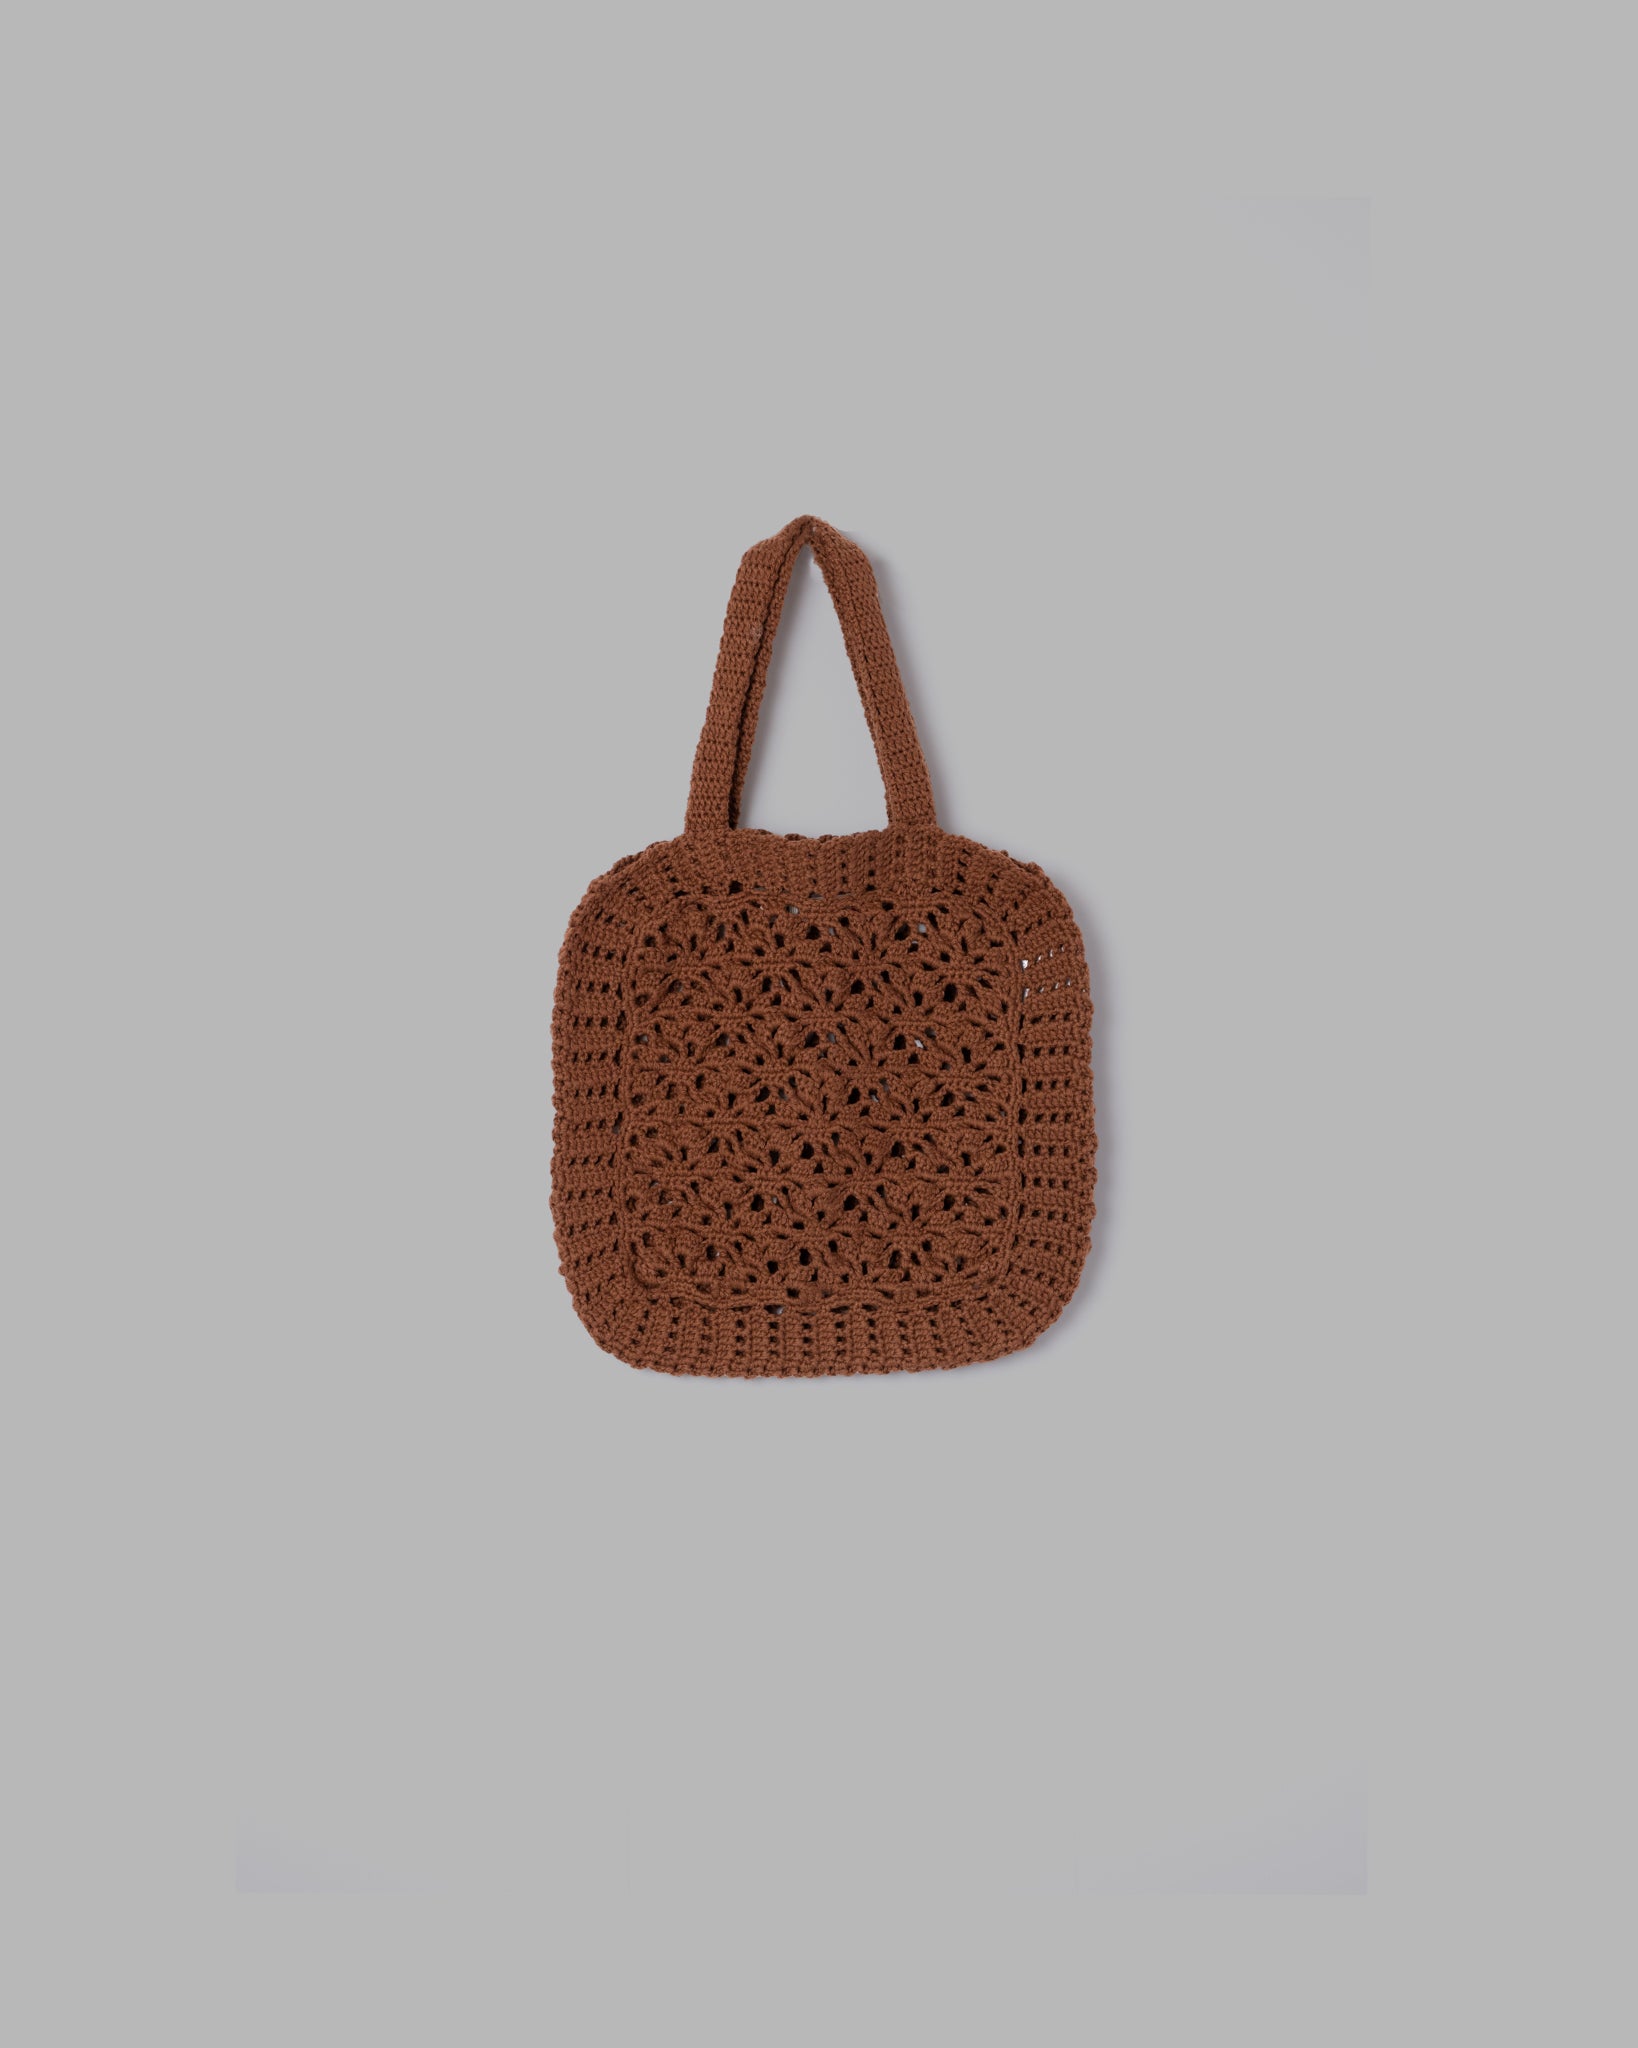 CROCHET HAND KNIT TOTE BAG - BROWN